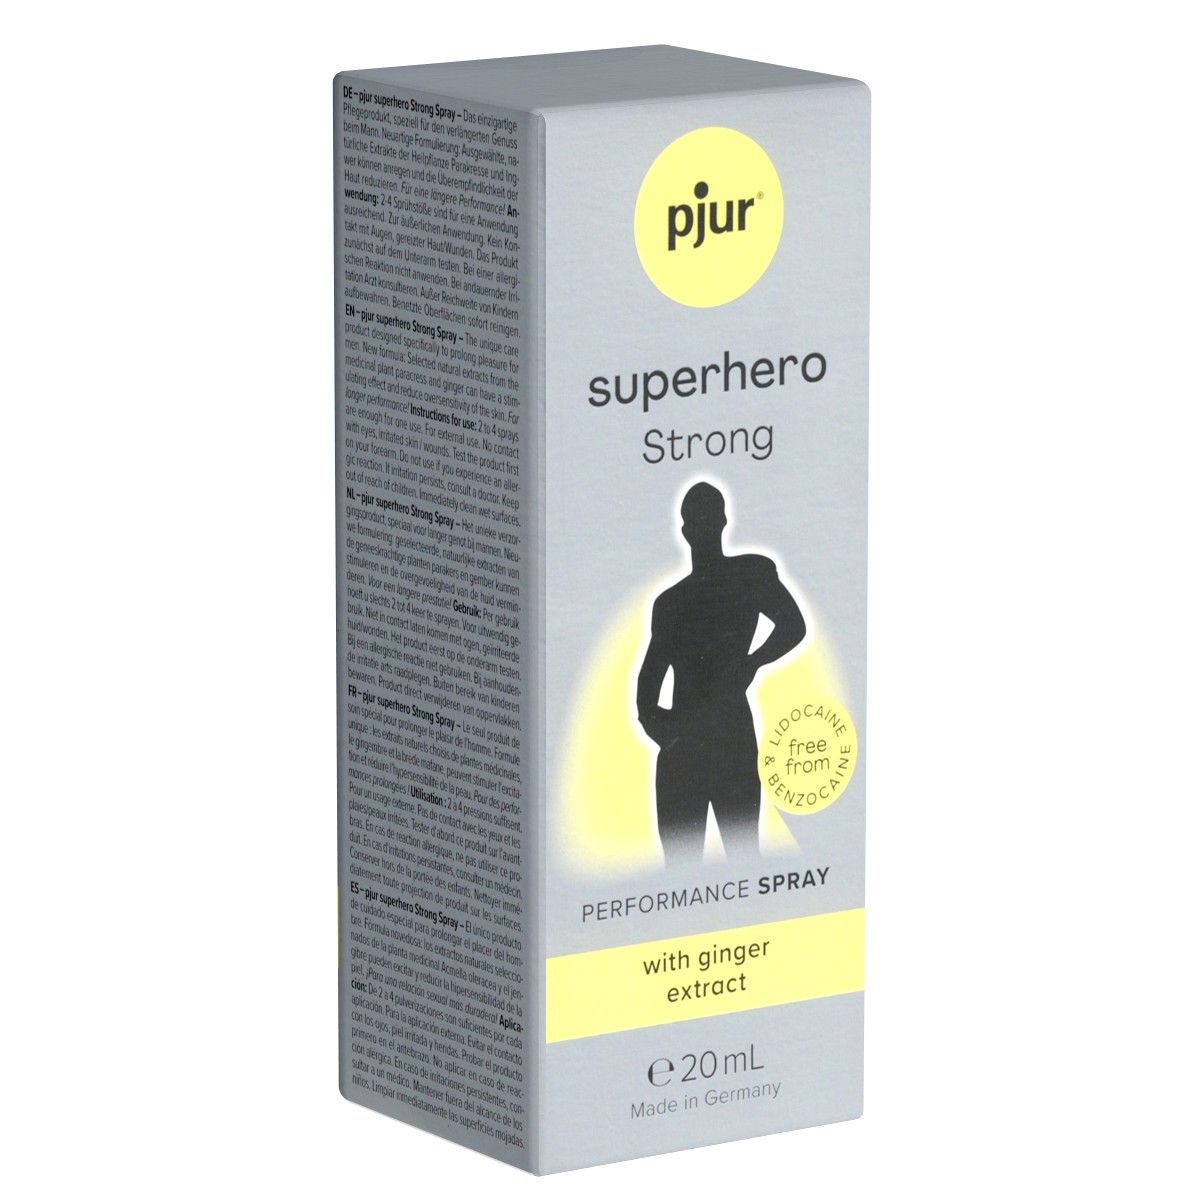 pjur® Superhero *Strong Performance Spray* with Ginger Extract